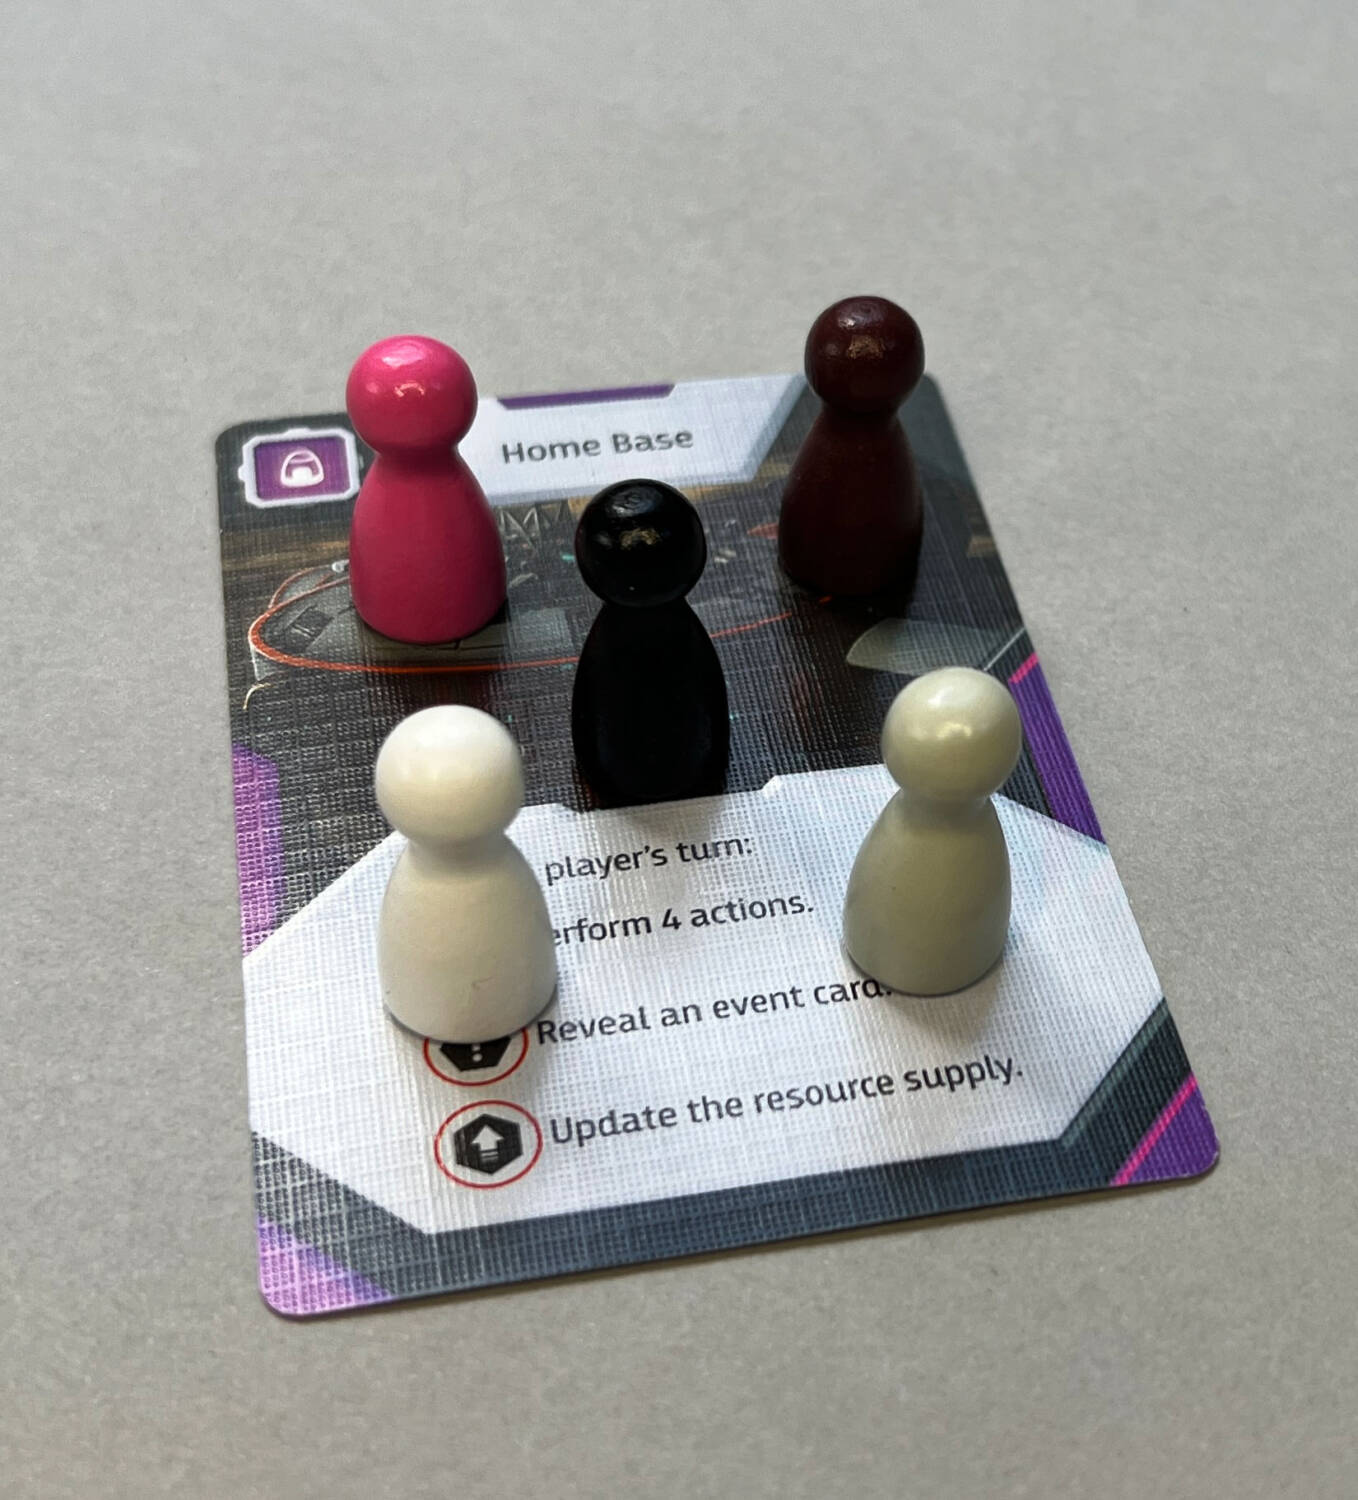 All five player tokens on the Home Base card. The black (center) and brown (back right) require good lighting to distinguish between the two, as do the white (front left) and gray (front right).